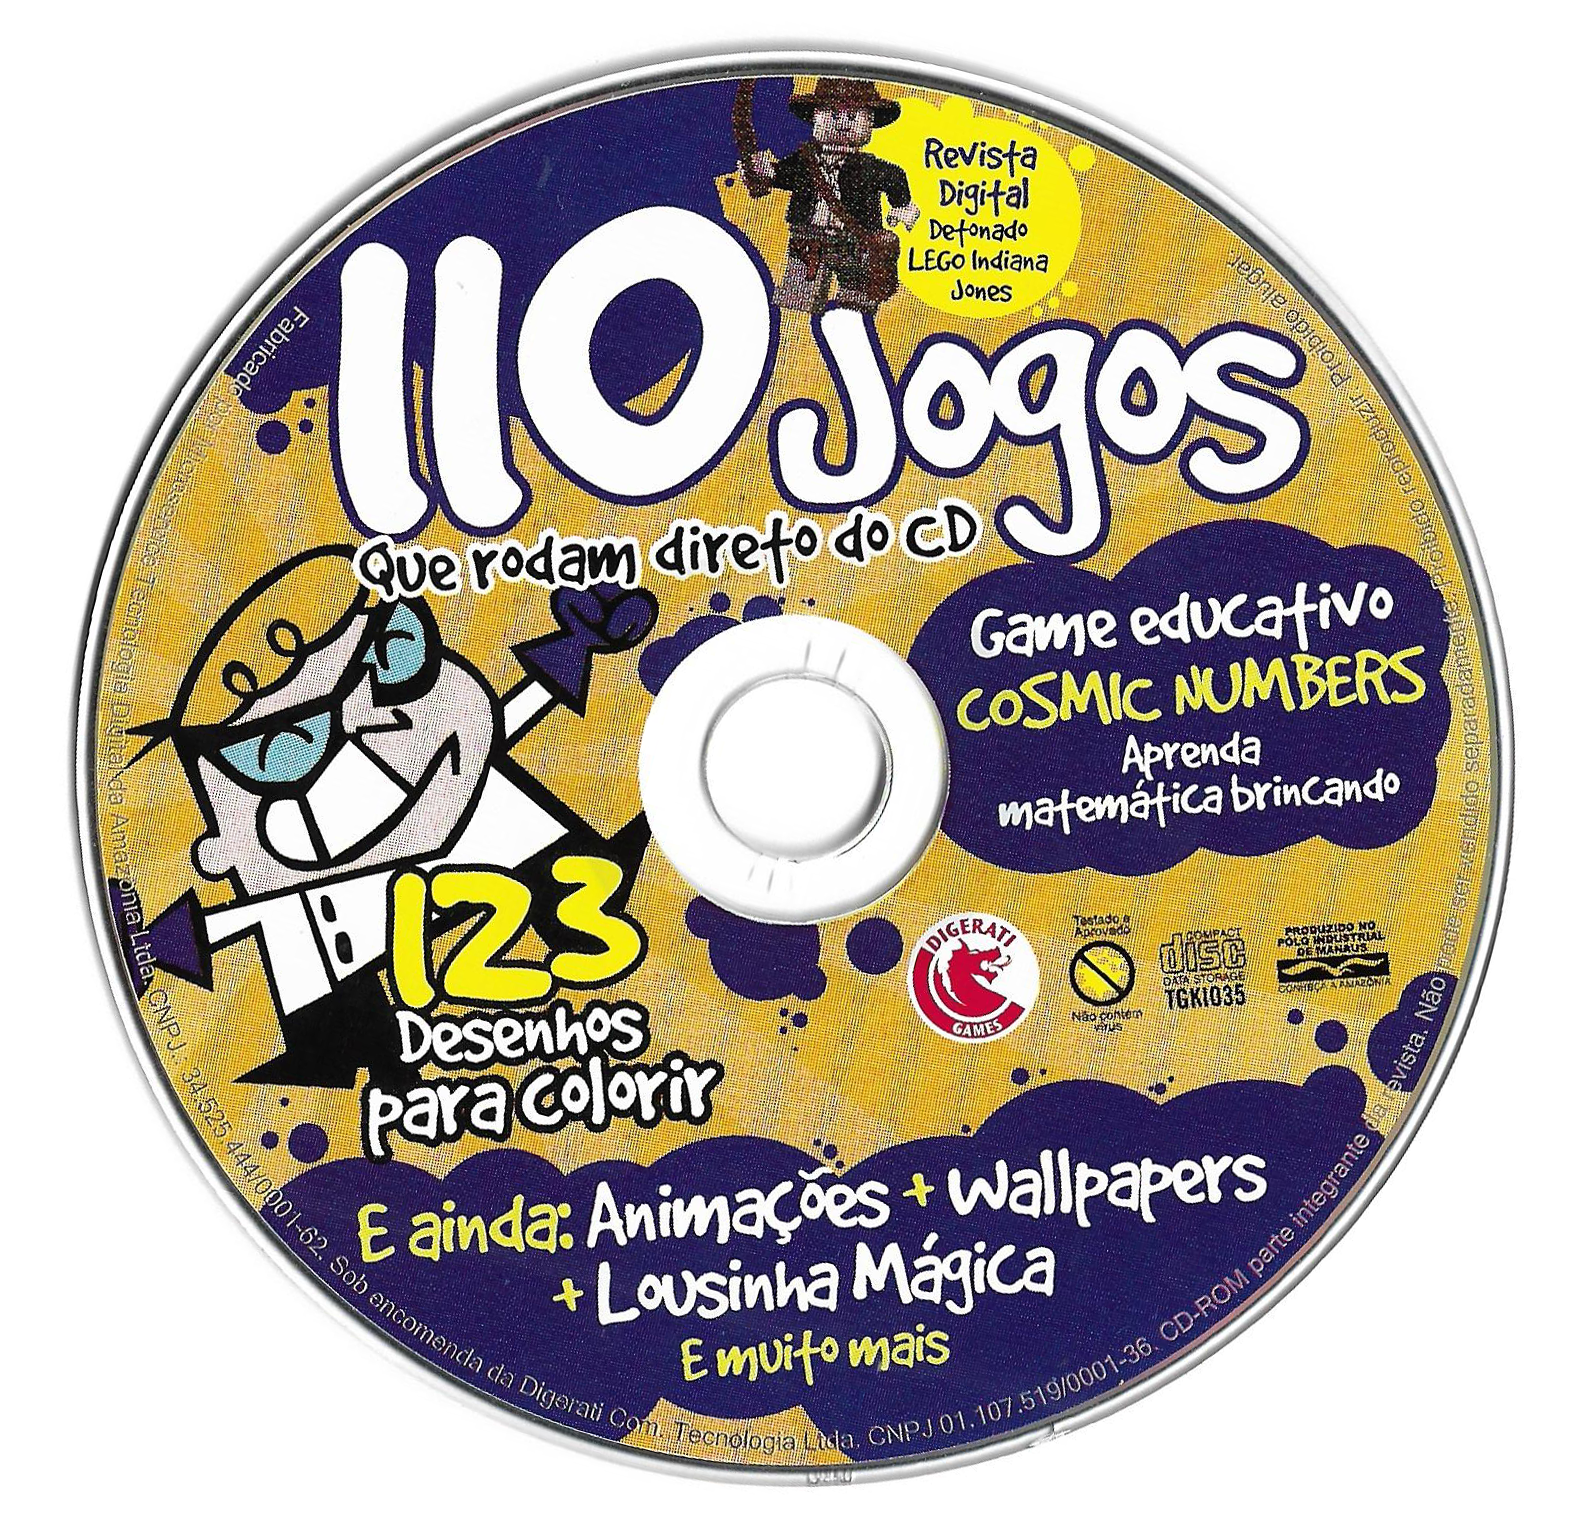 Best Games 3.000 Jogos #7 : Digerati : Free Download, Borrow, and Streaming  : Internet Archive